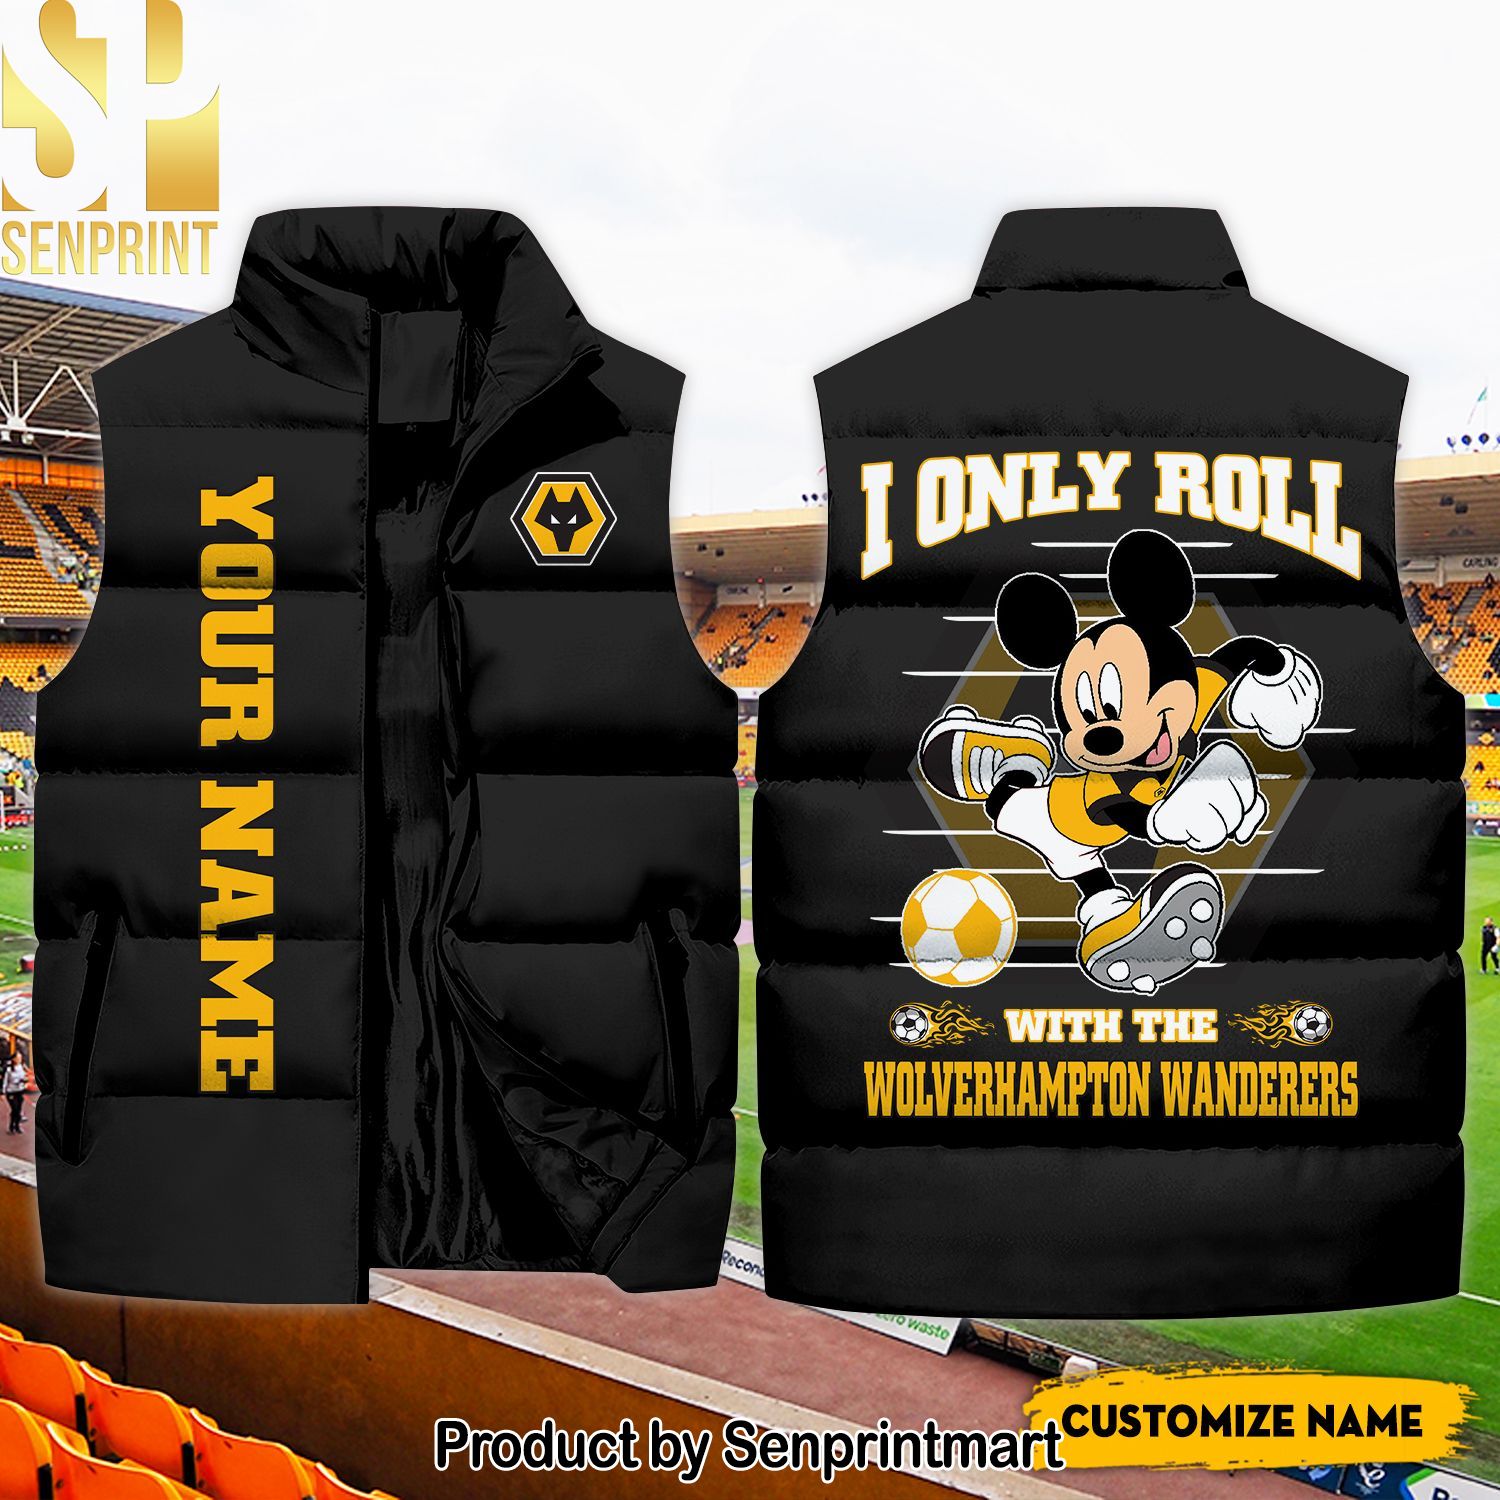 English Premier League I Only Roll With The Wolverhampton Wanderers Hot Fashion Sleeveless Jacket